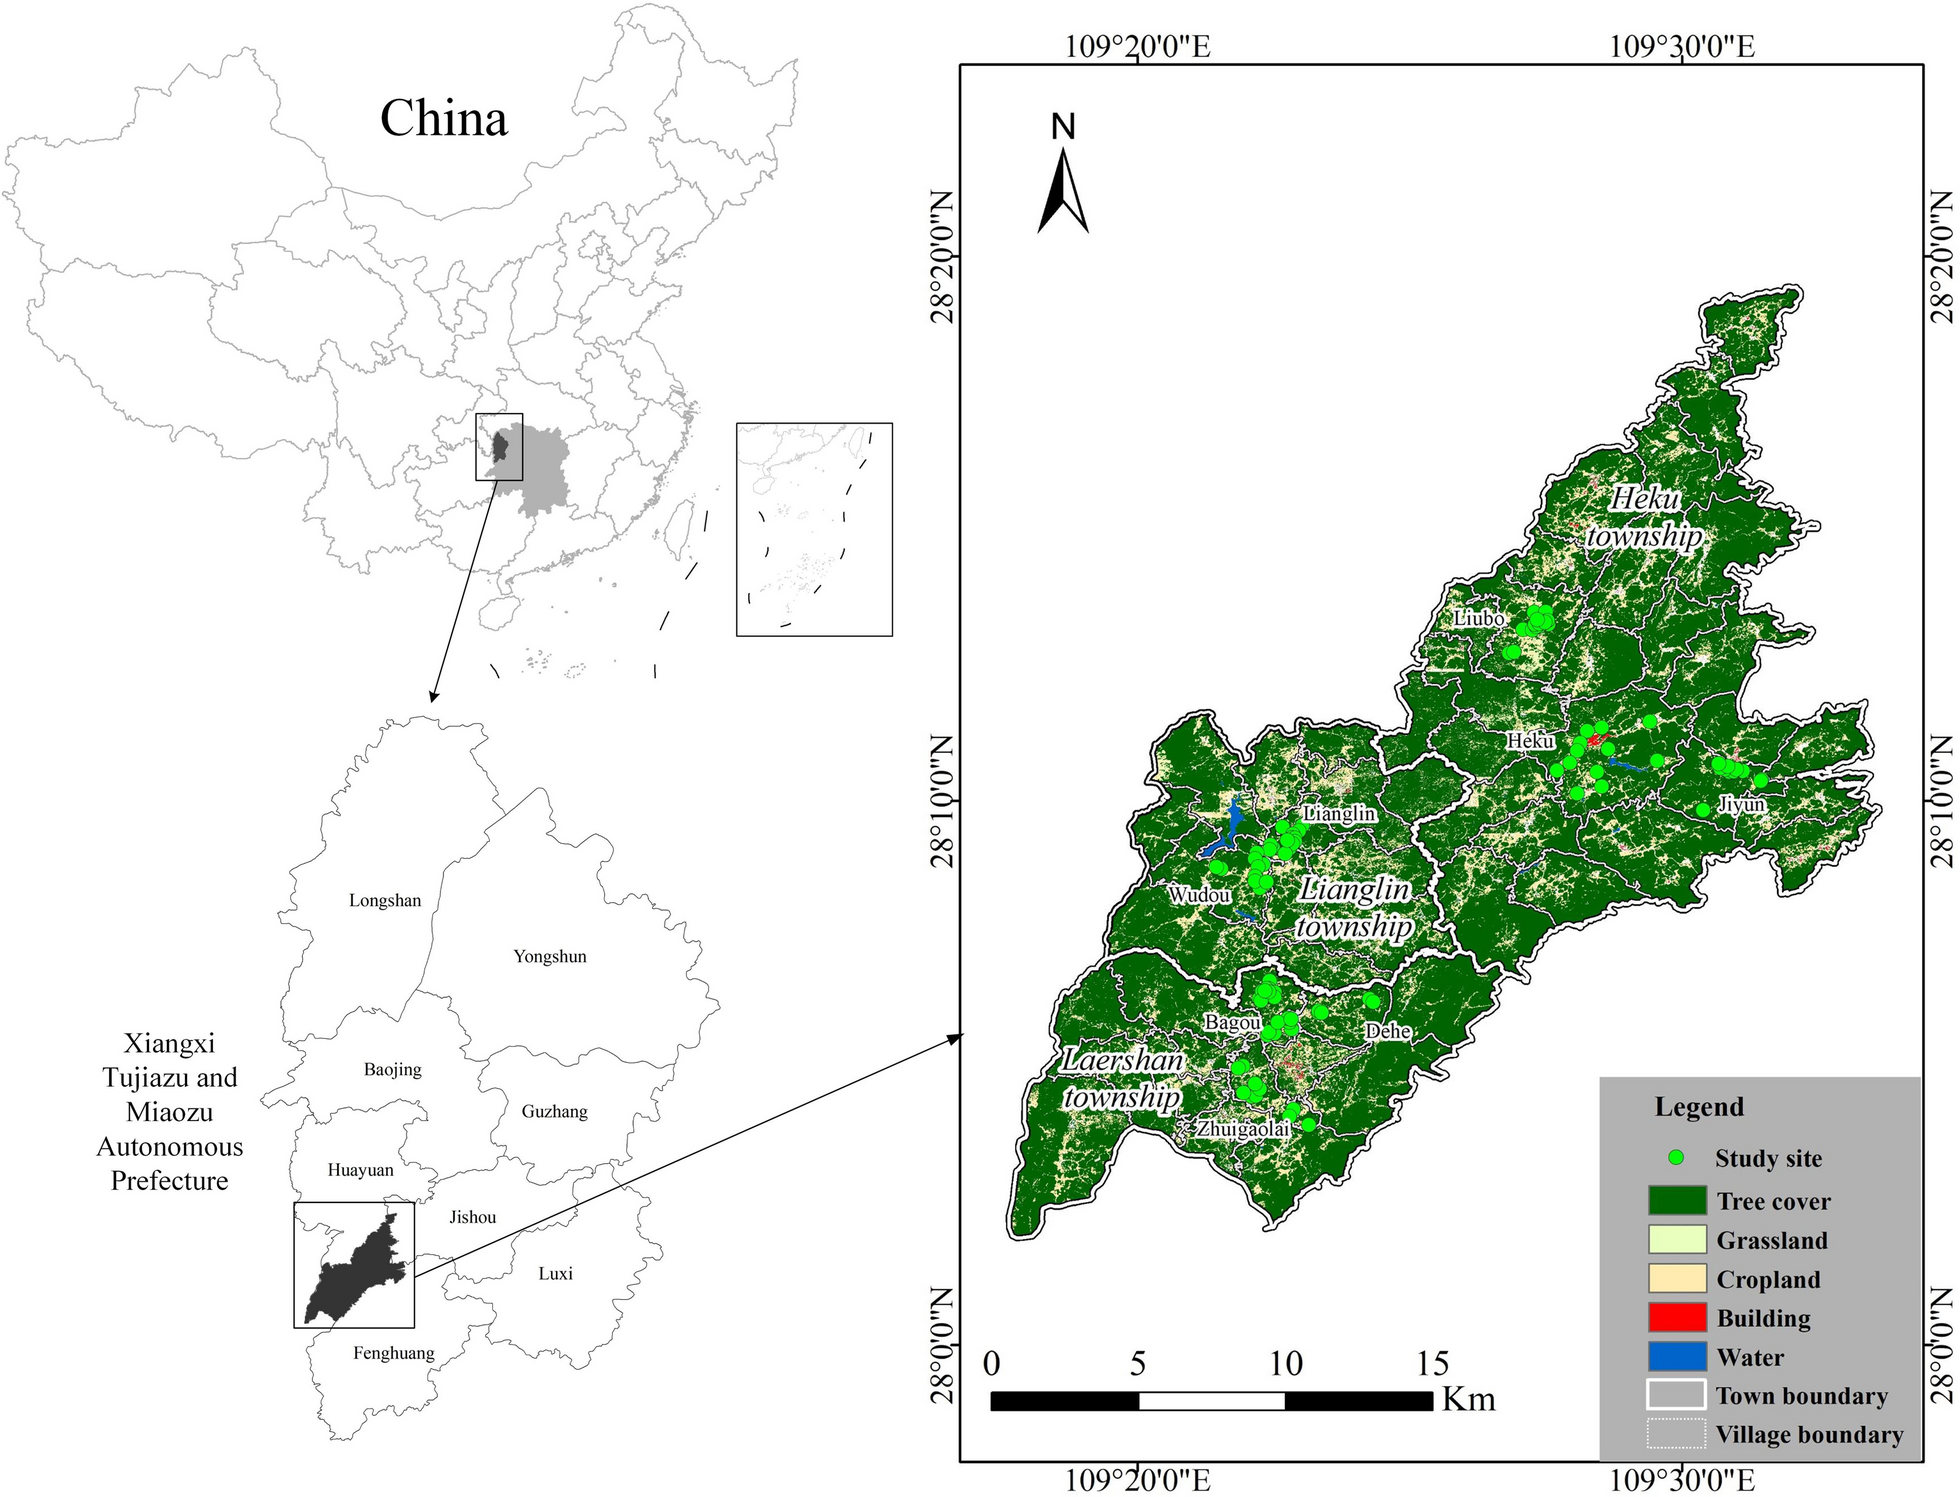 Local knowledge of homegarden plants in Miao ethnic communities in Laershan region, Xiangxi area, China